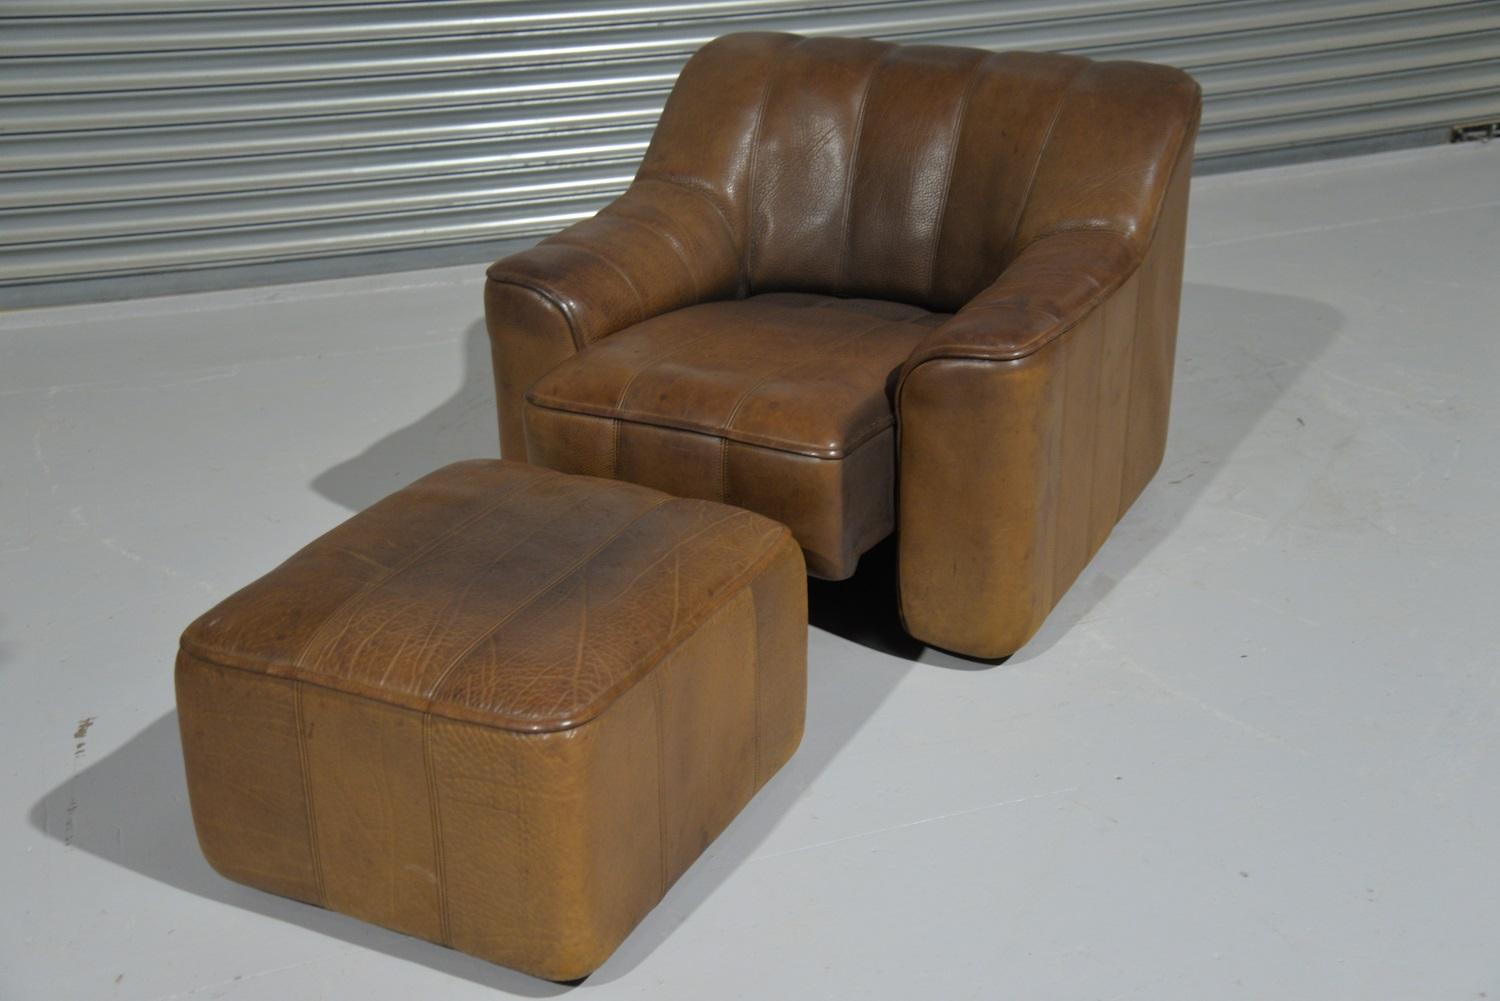 Discounted airfreight for our International customers (from 2 weeks door to door)

We are delighted to bring to you a vintage 1970s De Sede DS 44 armchair and matching ottoman in thick buffalo leather with hand stitched detail. This vintage lounge